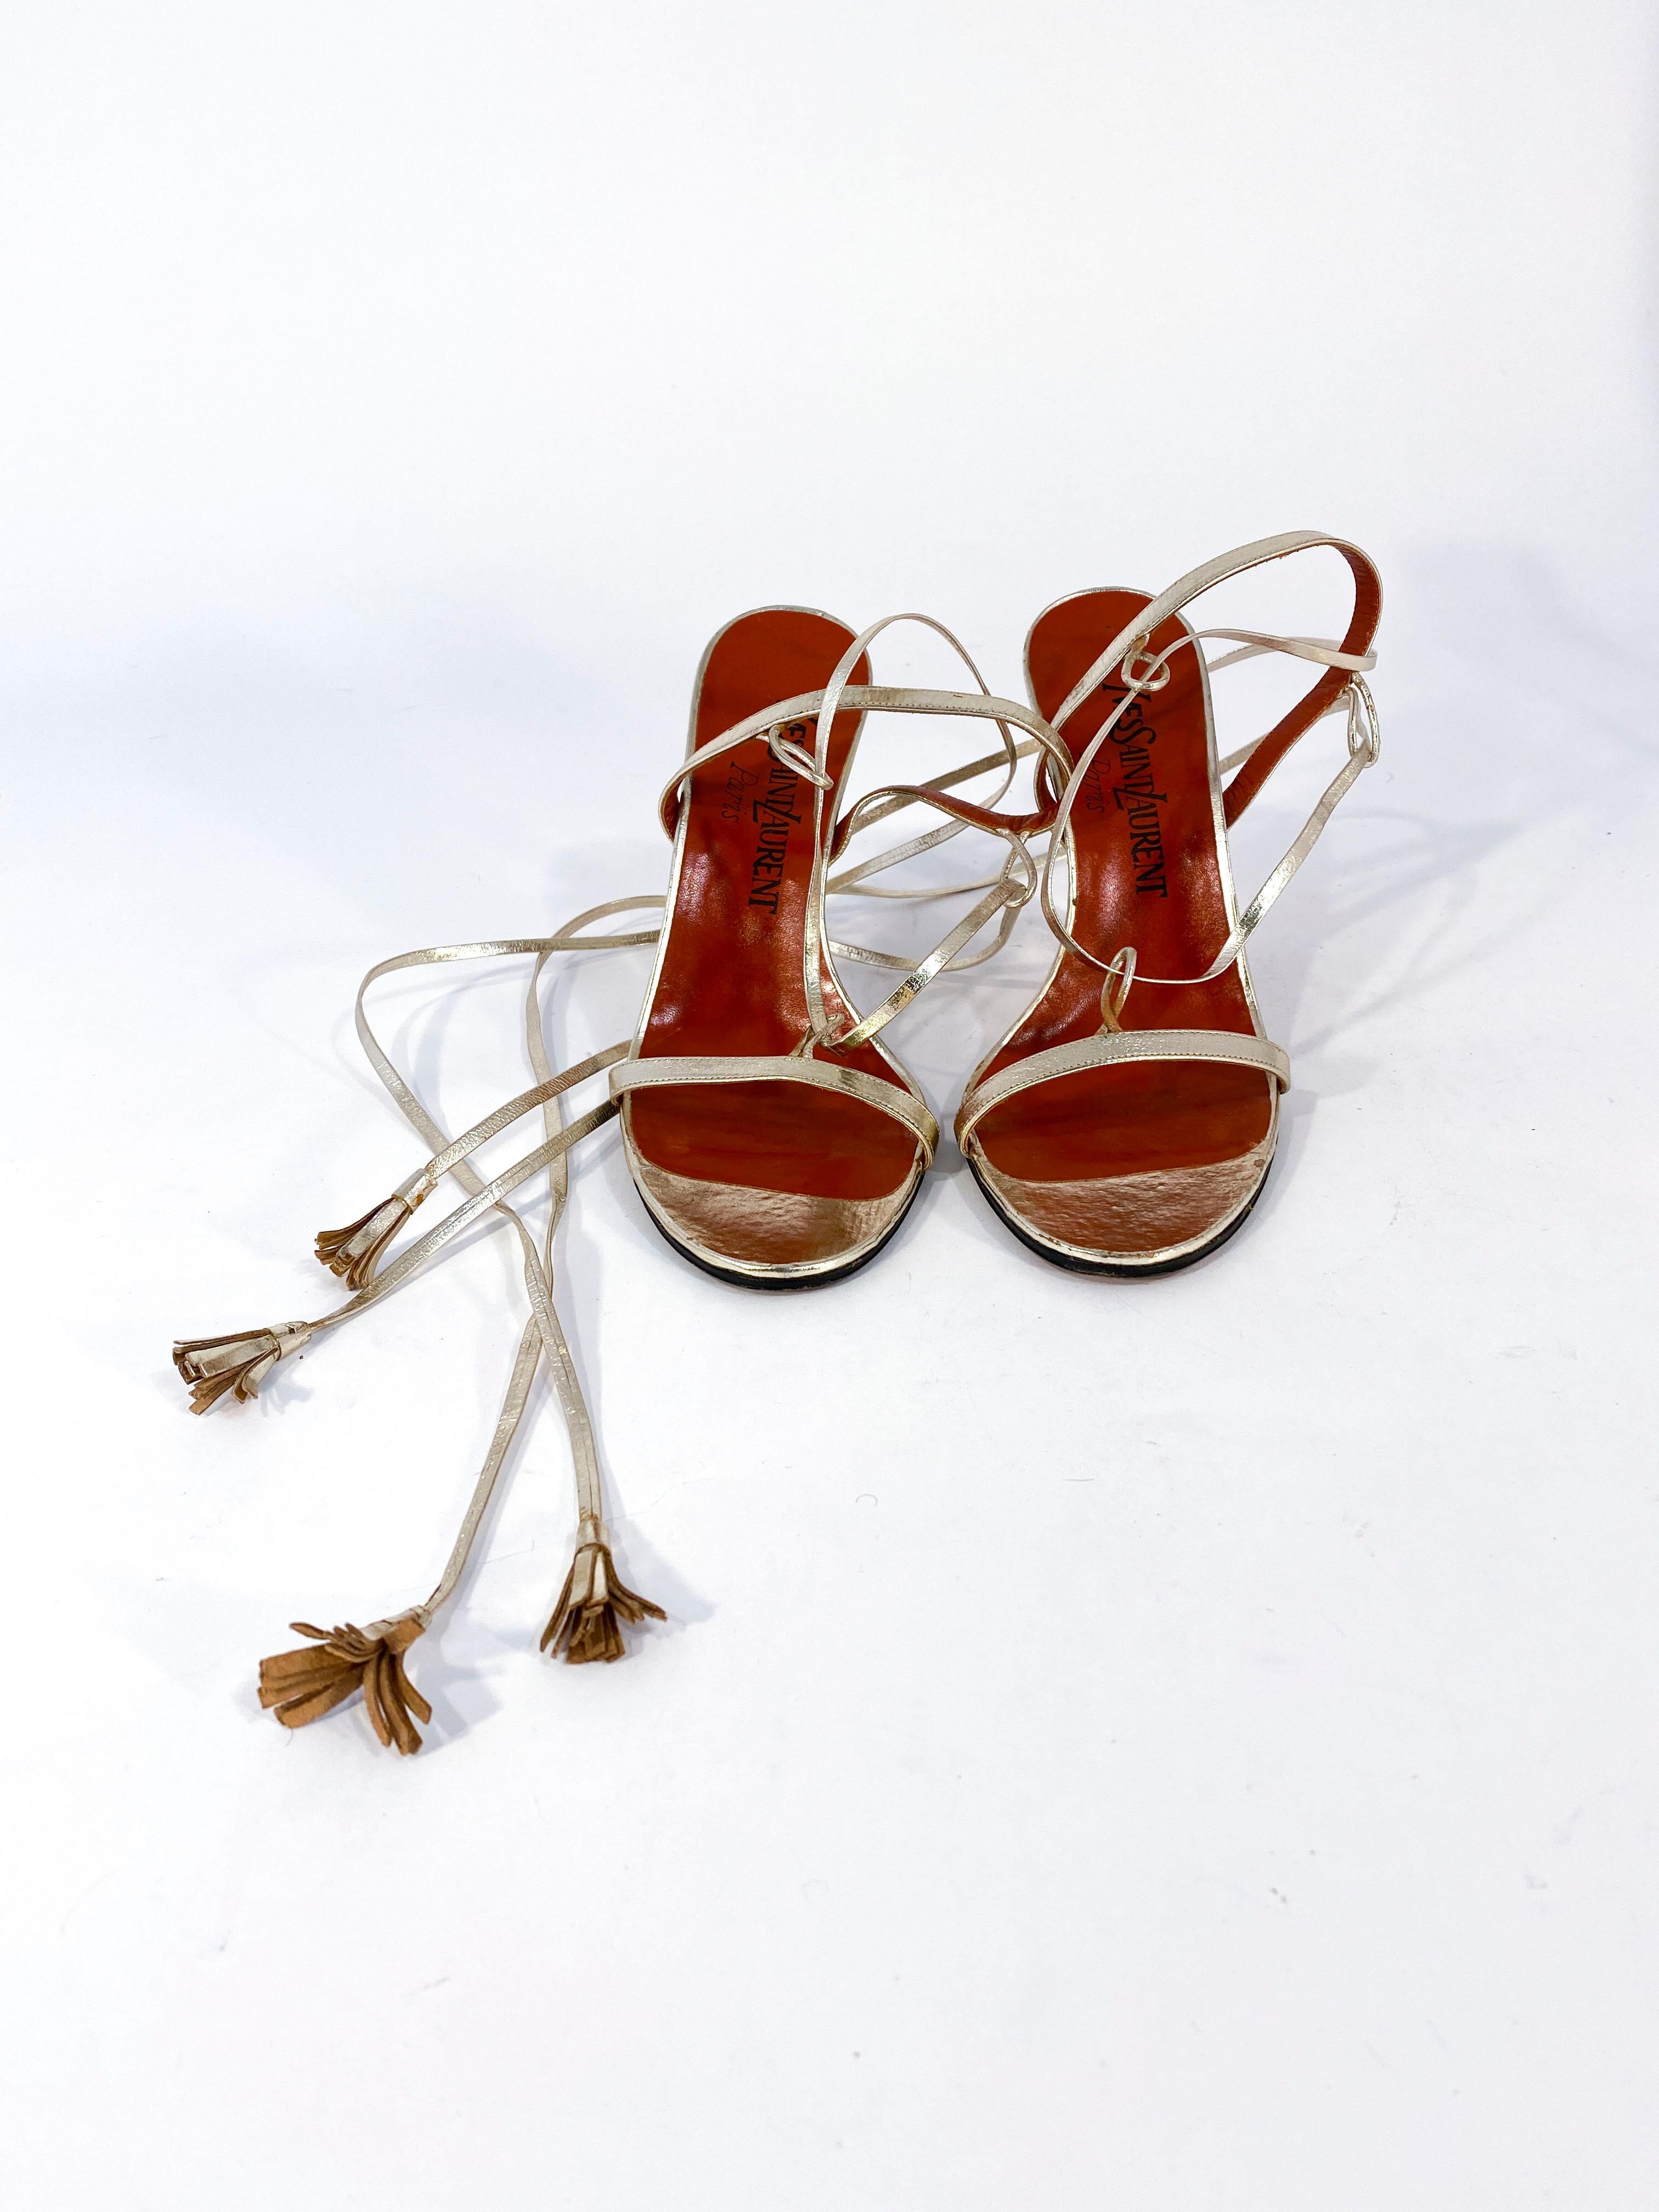 Brown 1978 Yves Saint Laurent Gold Metallic Heels with Ankle Tie Straps